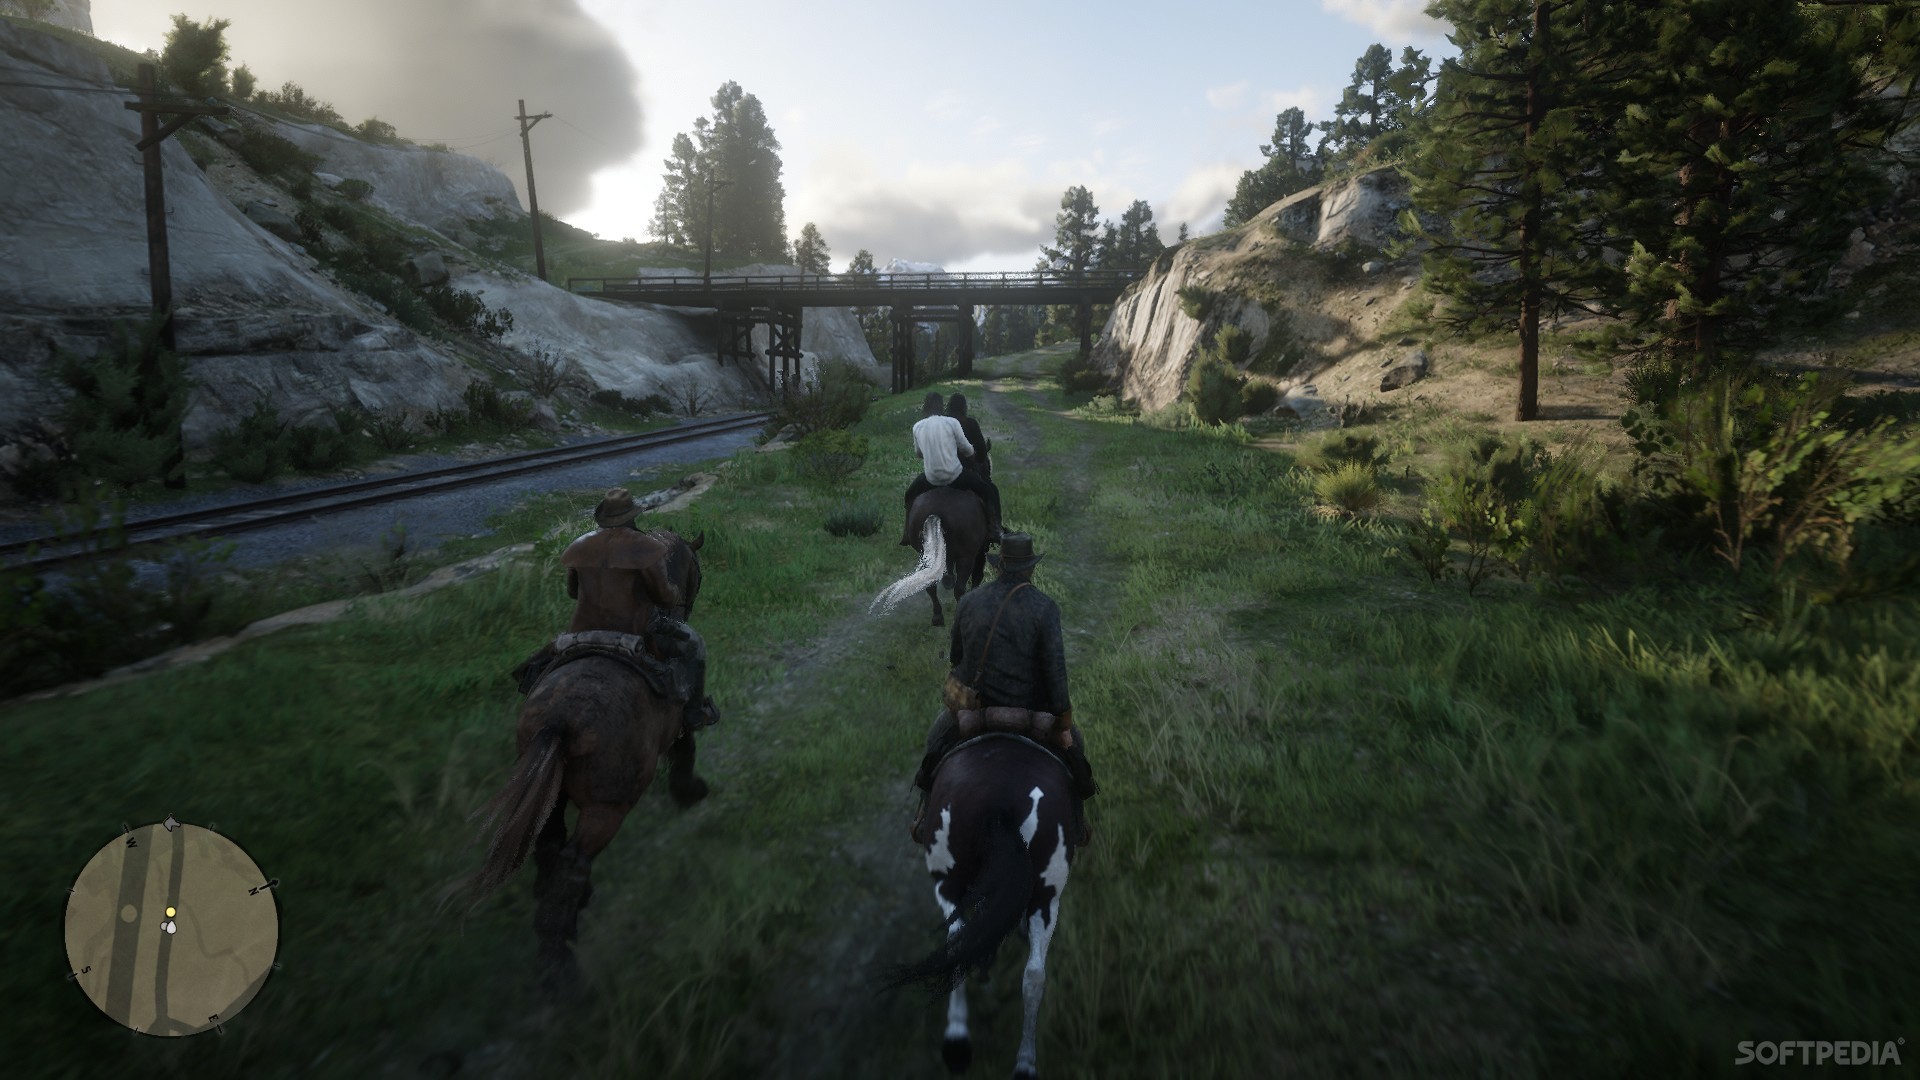 Red Dead Redemption 2 Review: In The Details - Gideon's Gaming